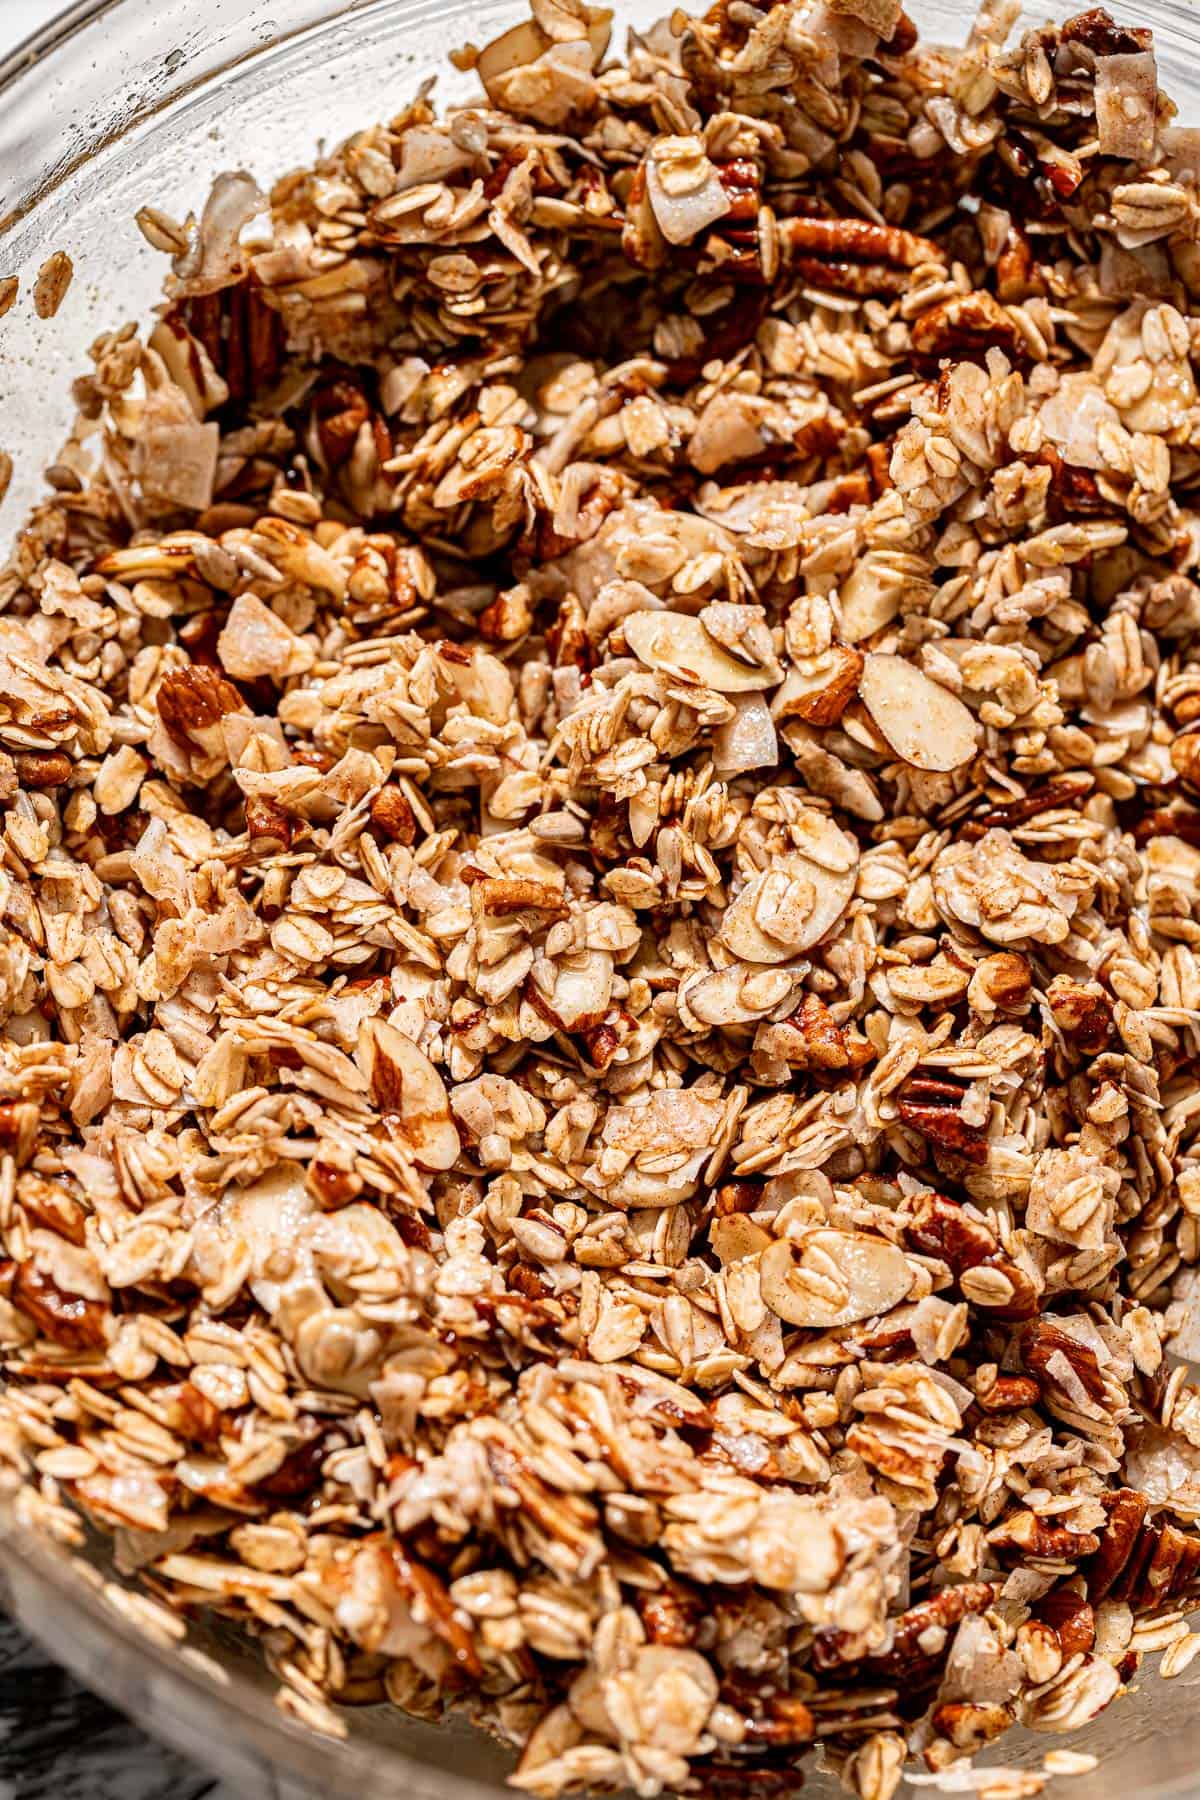 maple nut granola ingredients in a glass bowl.